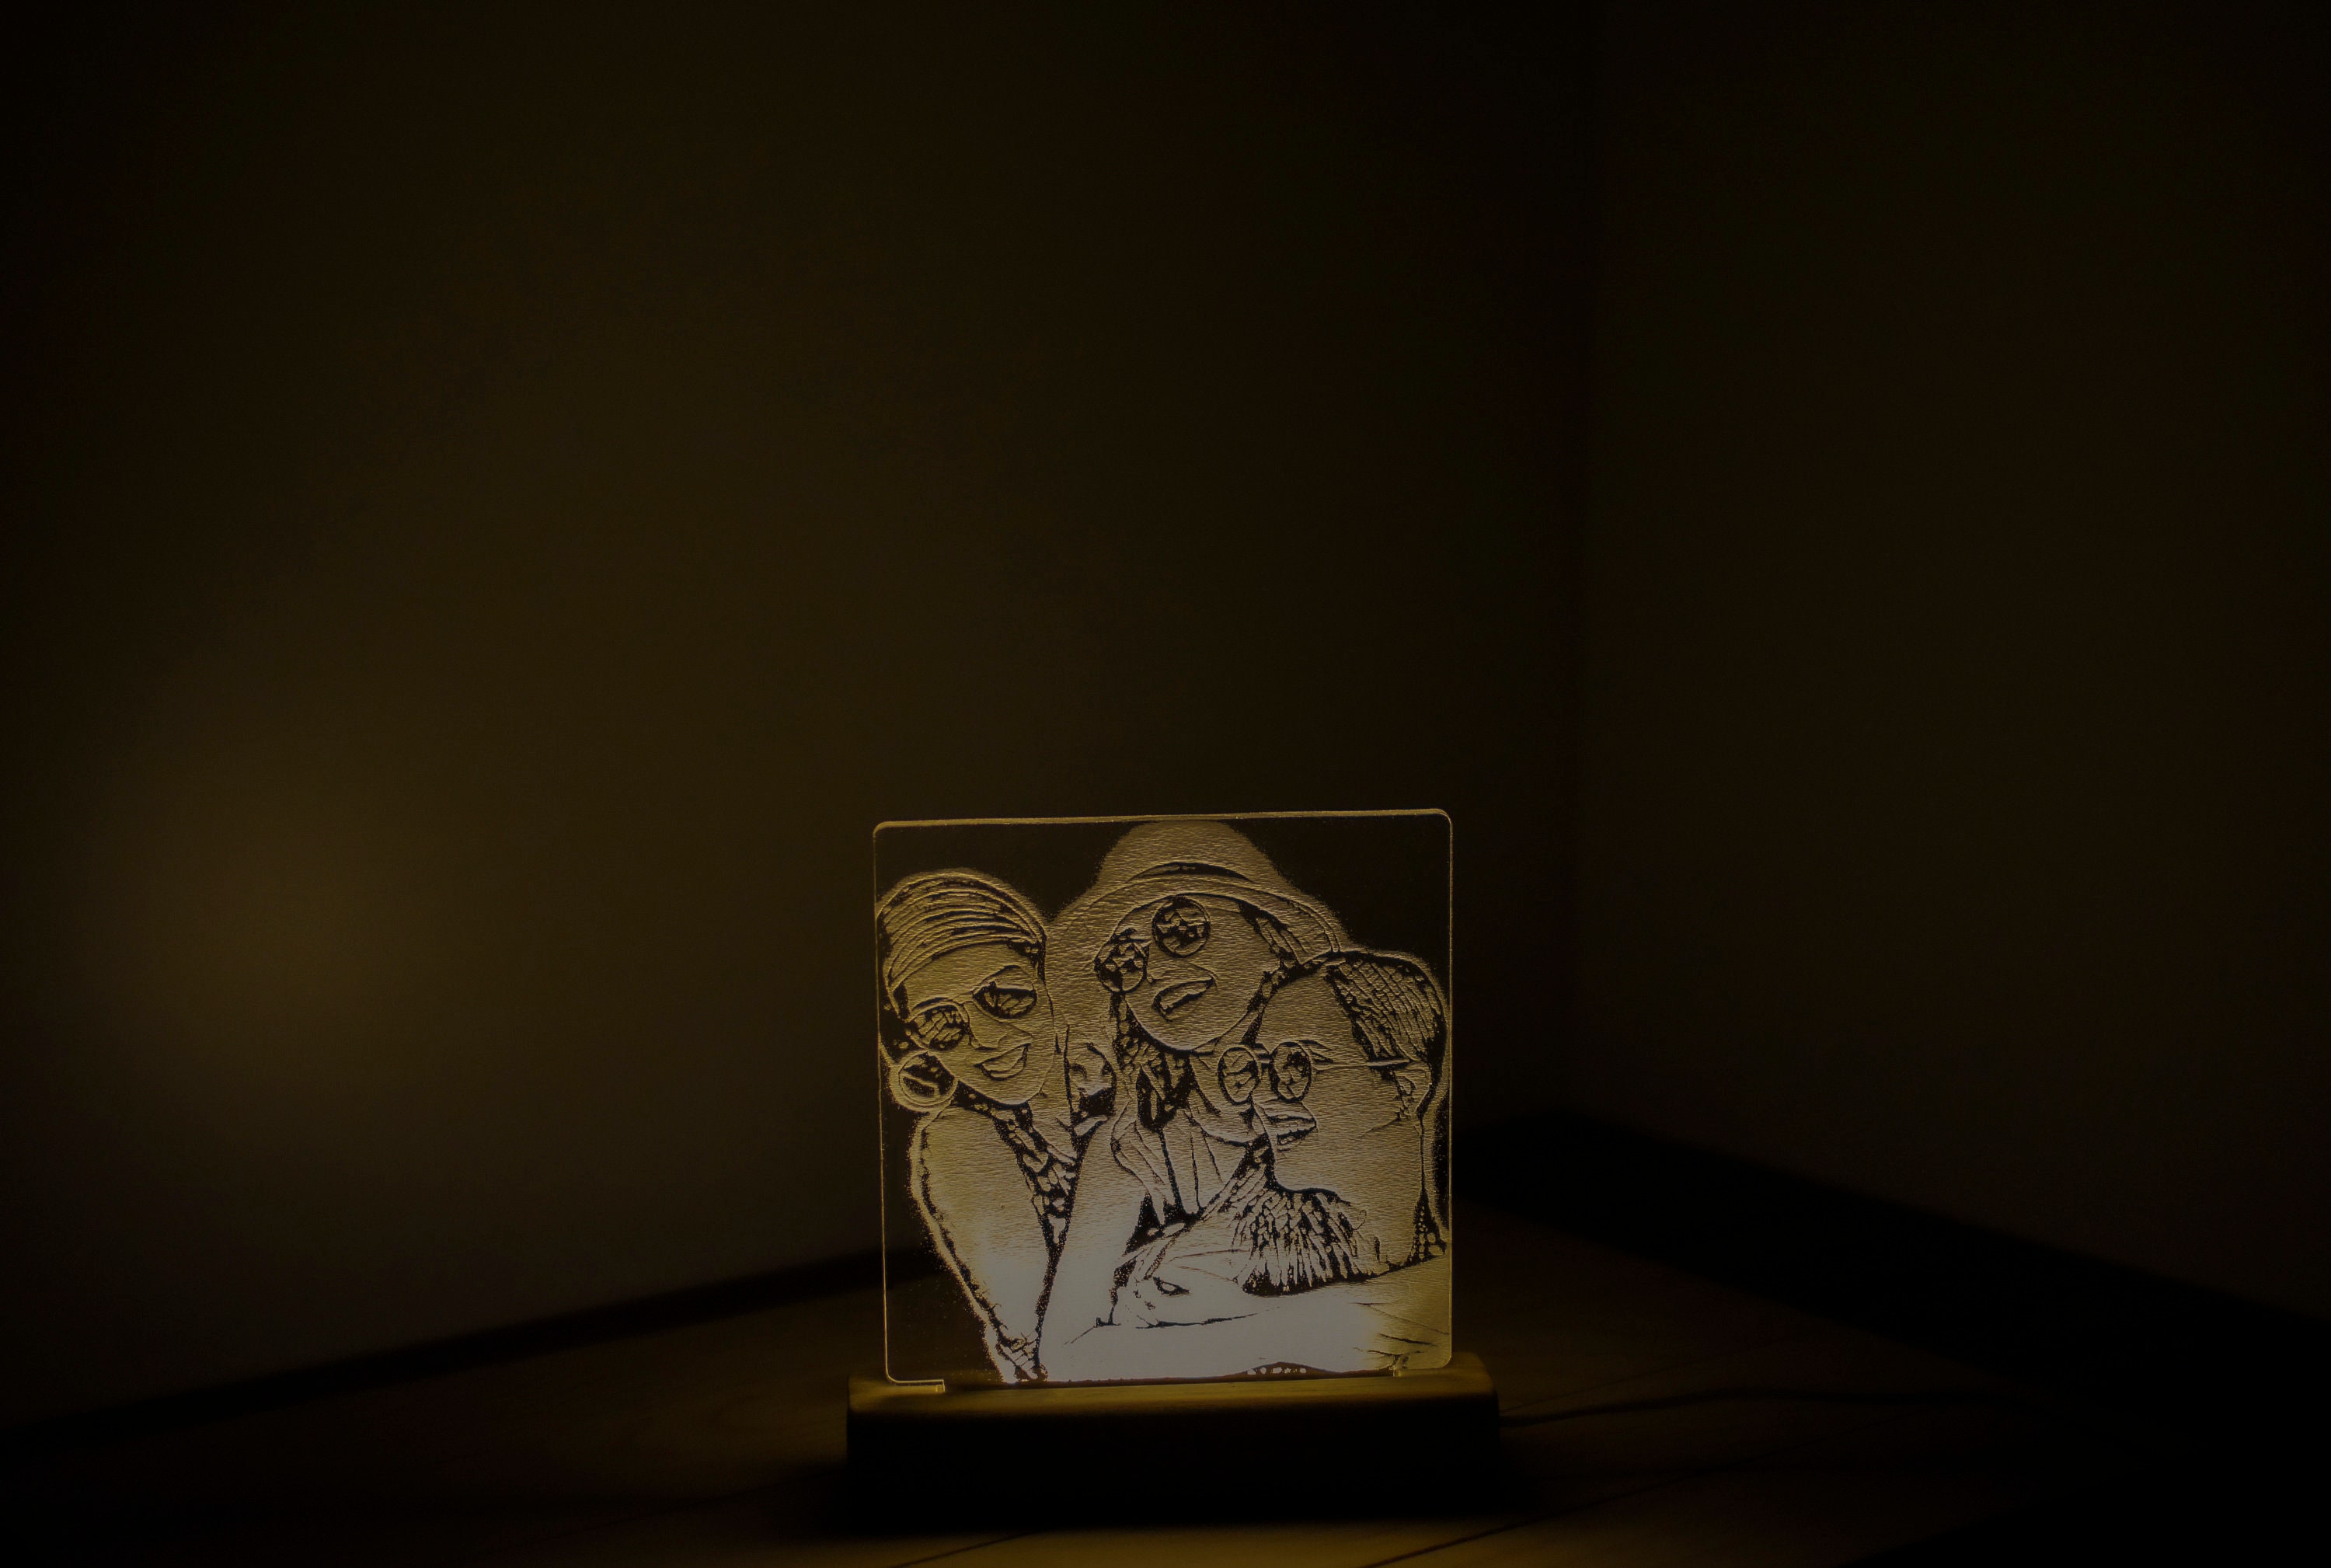 Personalized Led Lamp as Gift for Her. Photo Night Light as | Etsy